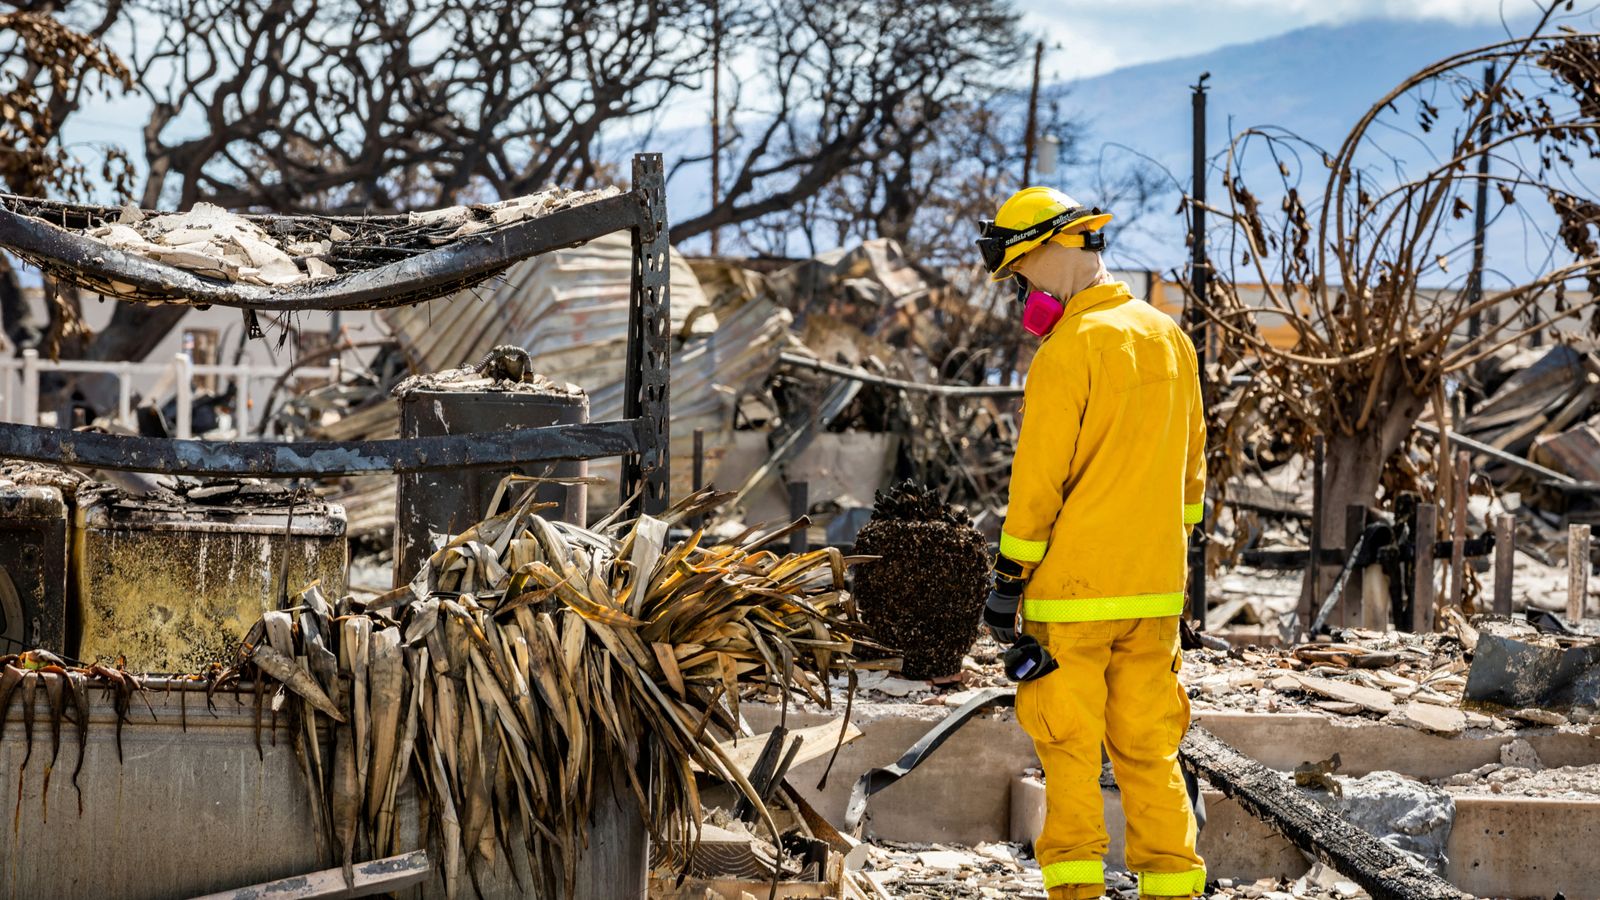 Hawaii wildfires: Missing persons list released with 388 still unaccounted for after blazes